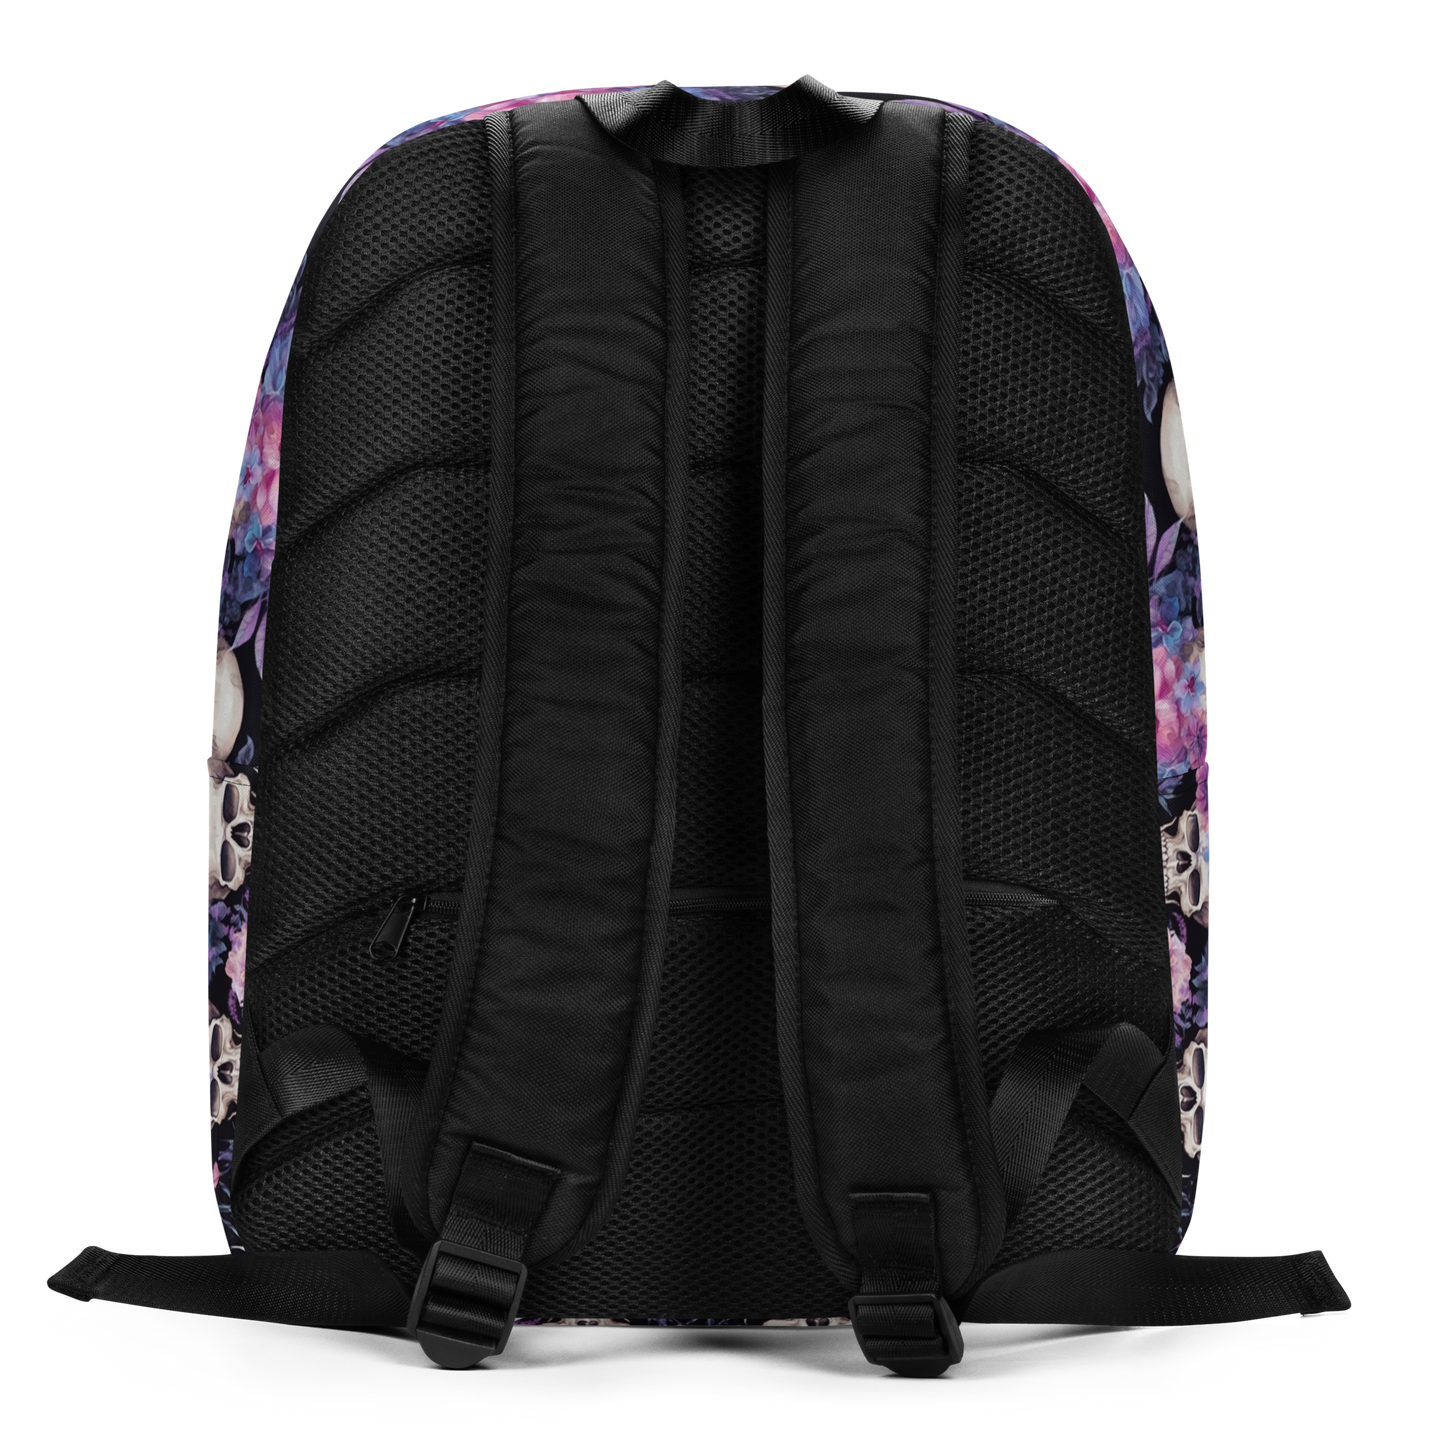 Pretty Dead Minimalist Backpack, Backpack with 15" inside pocket for Laptop, Hidden Pocket for Wallet, Lightweight well made